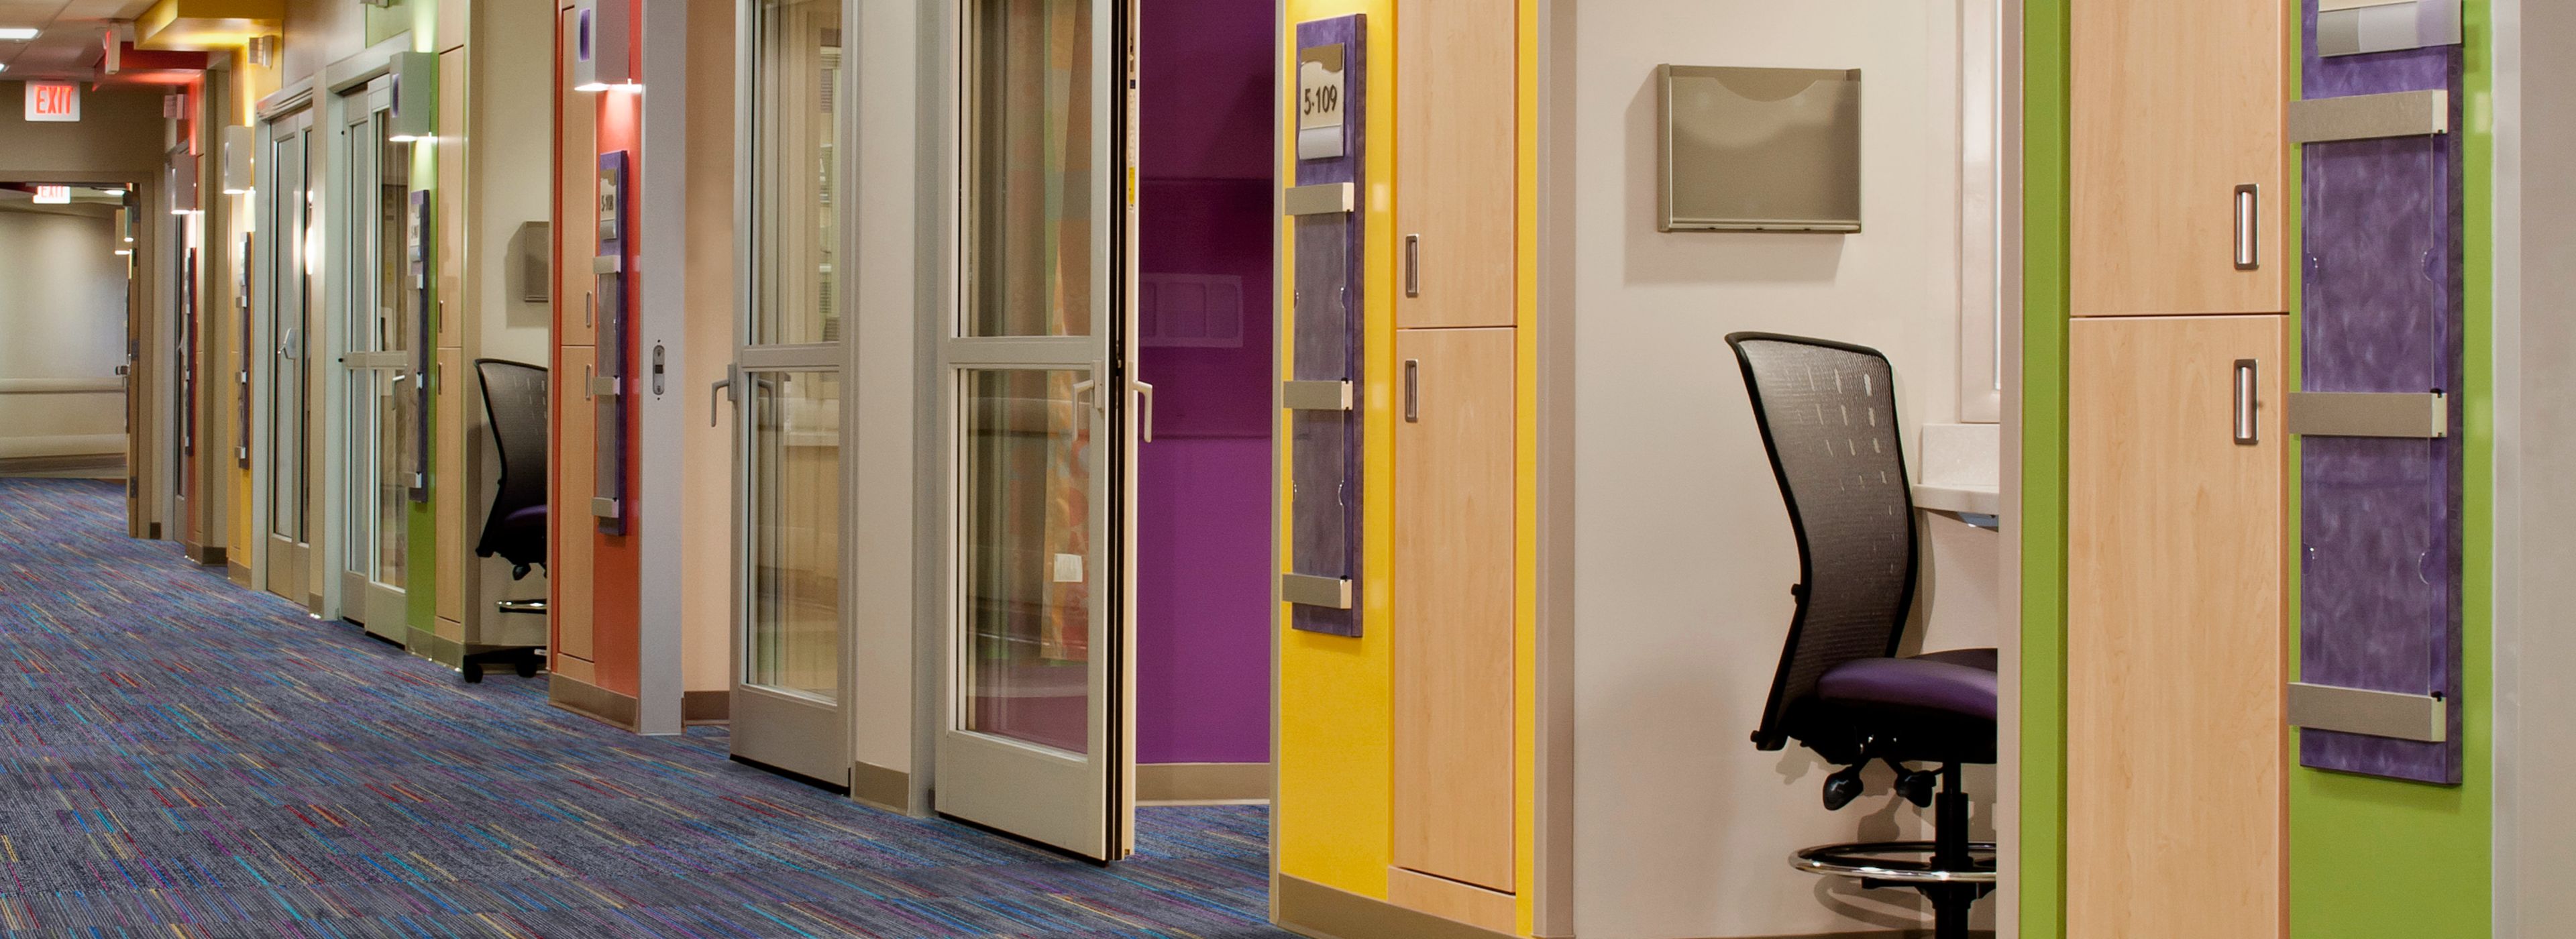 Interface Roy G Biv carpet tile in healthcare corridor with multiple rooms numéro d’image 1